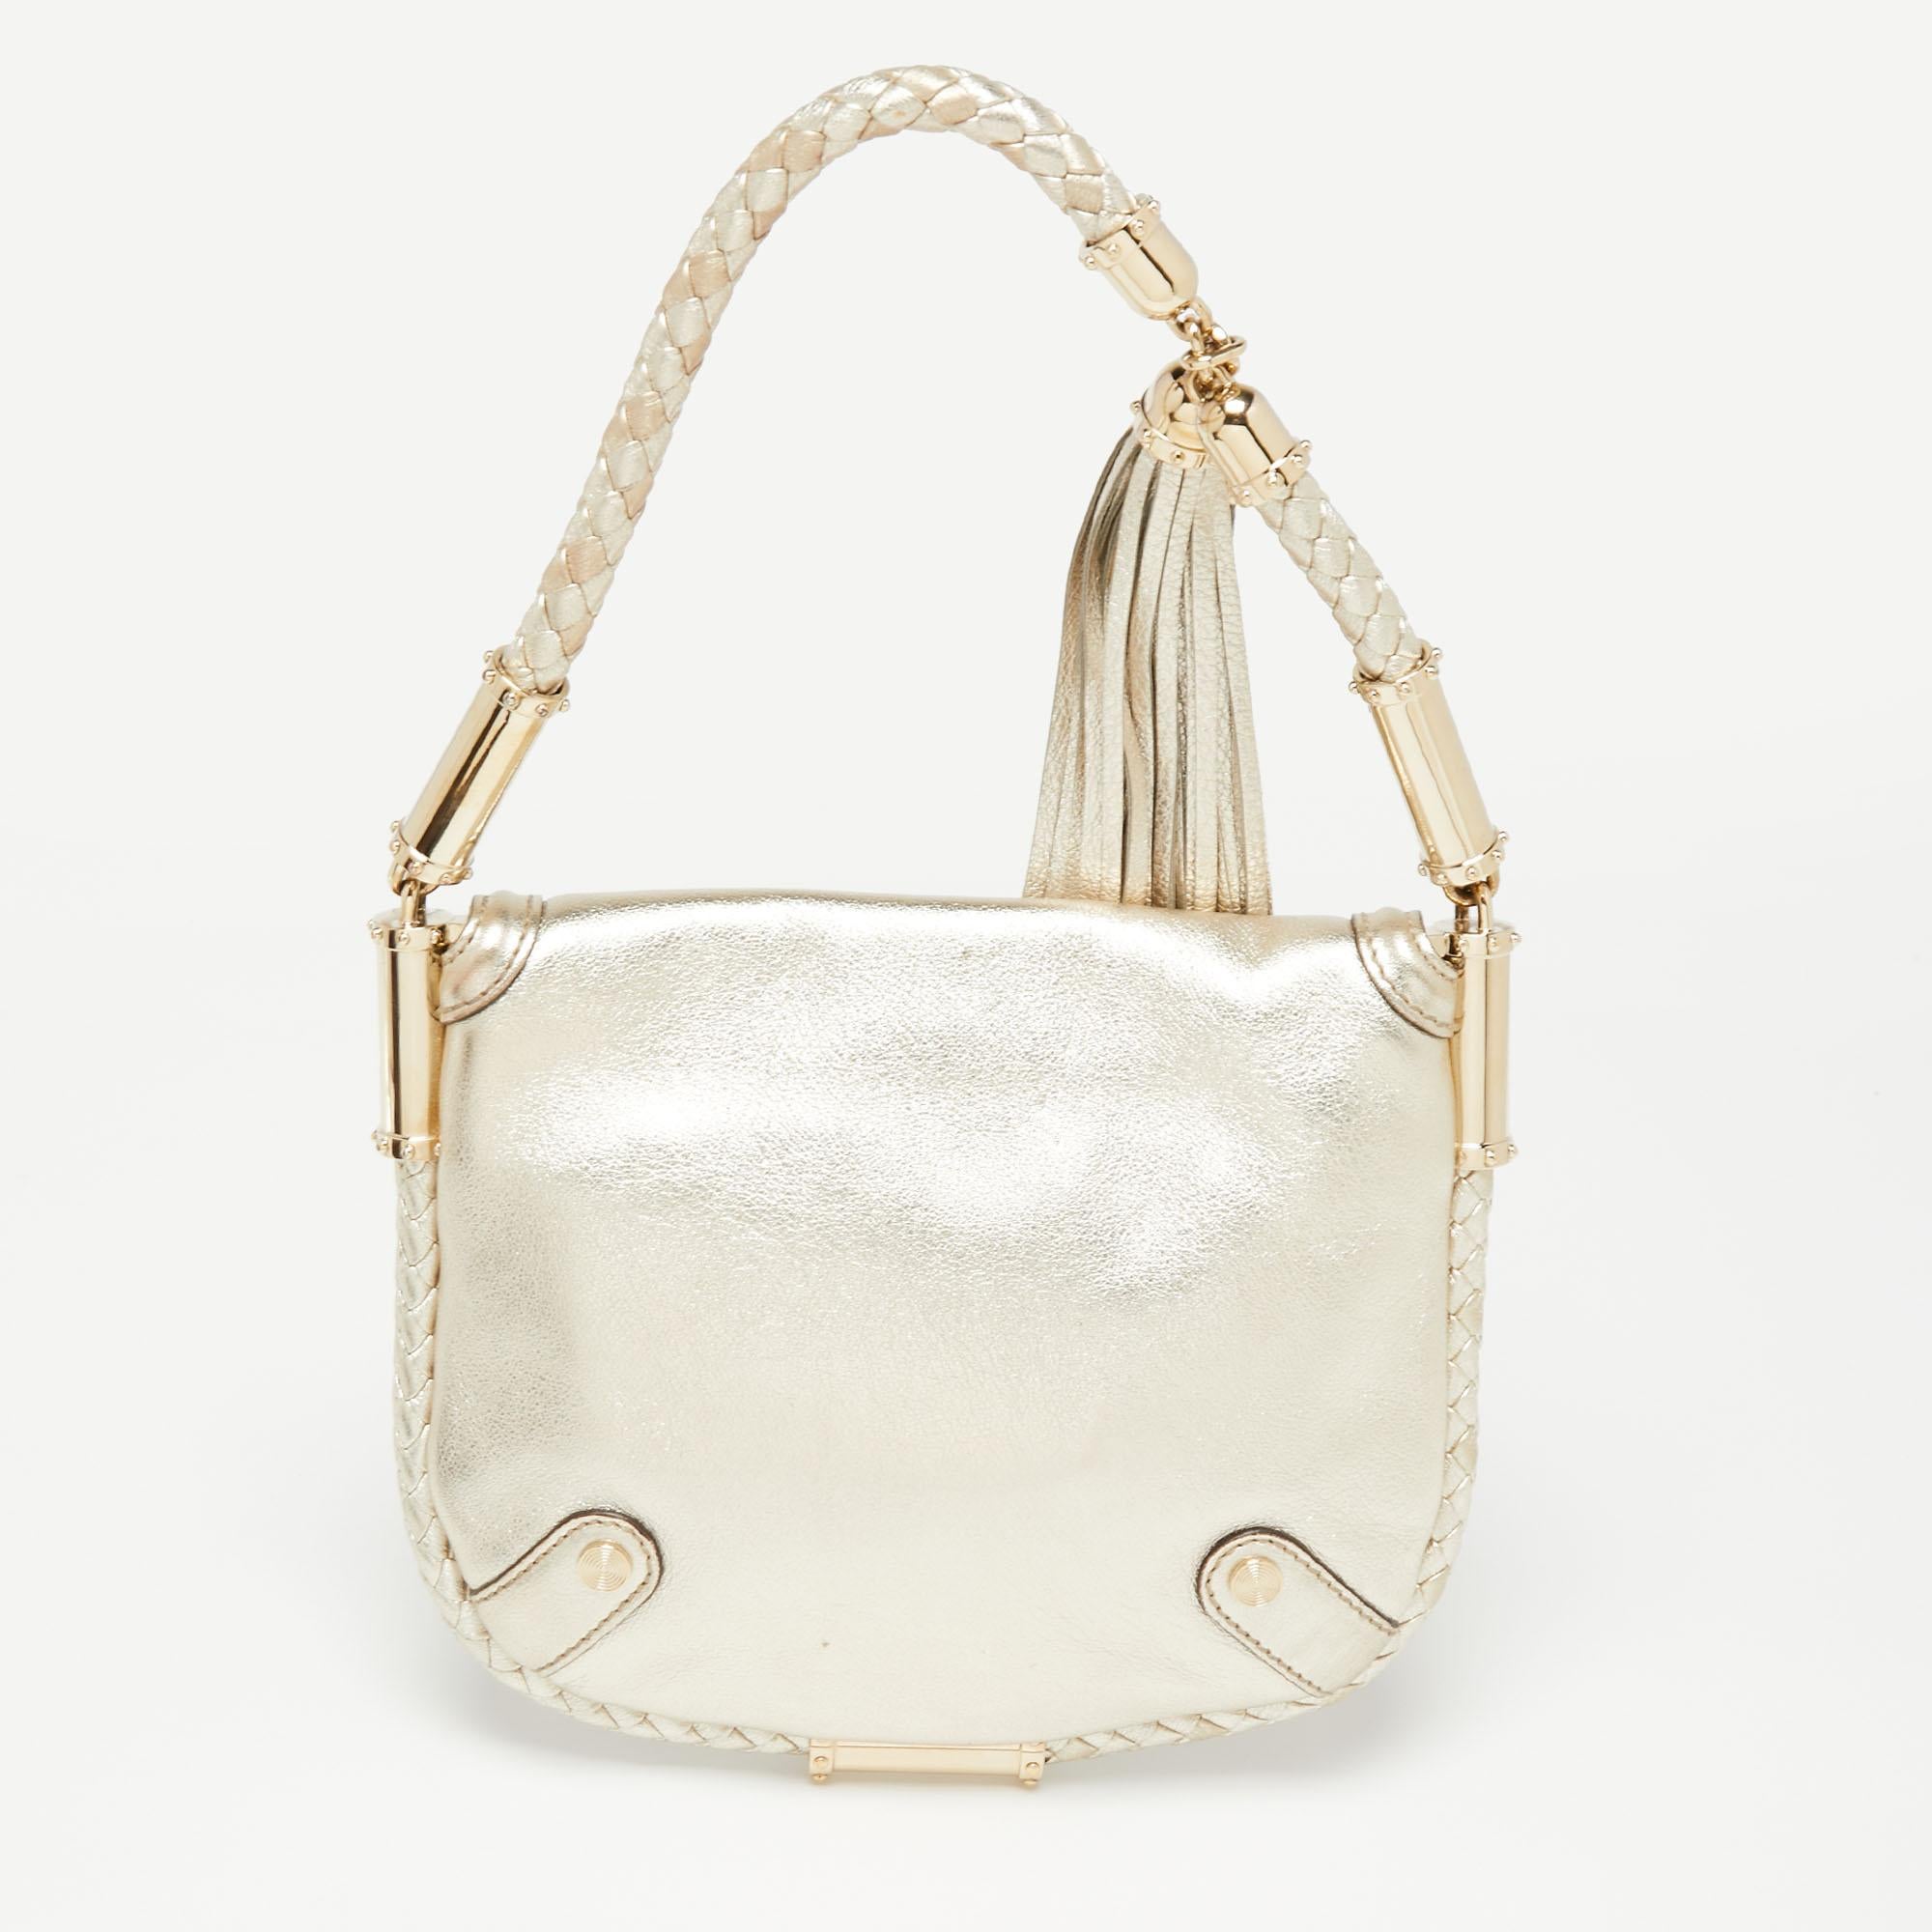 Simple details, high quality, and everyday convenience mark this Britt hobo by Gucci. The bag is made of gold glossy leather and it features a single handle, a gold-tone GG logo on the front, and a spacious interior.

Includes: Original Dustbag